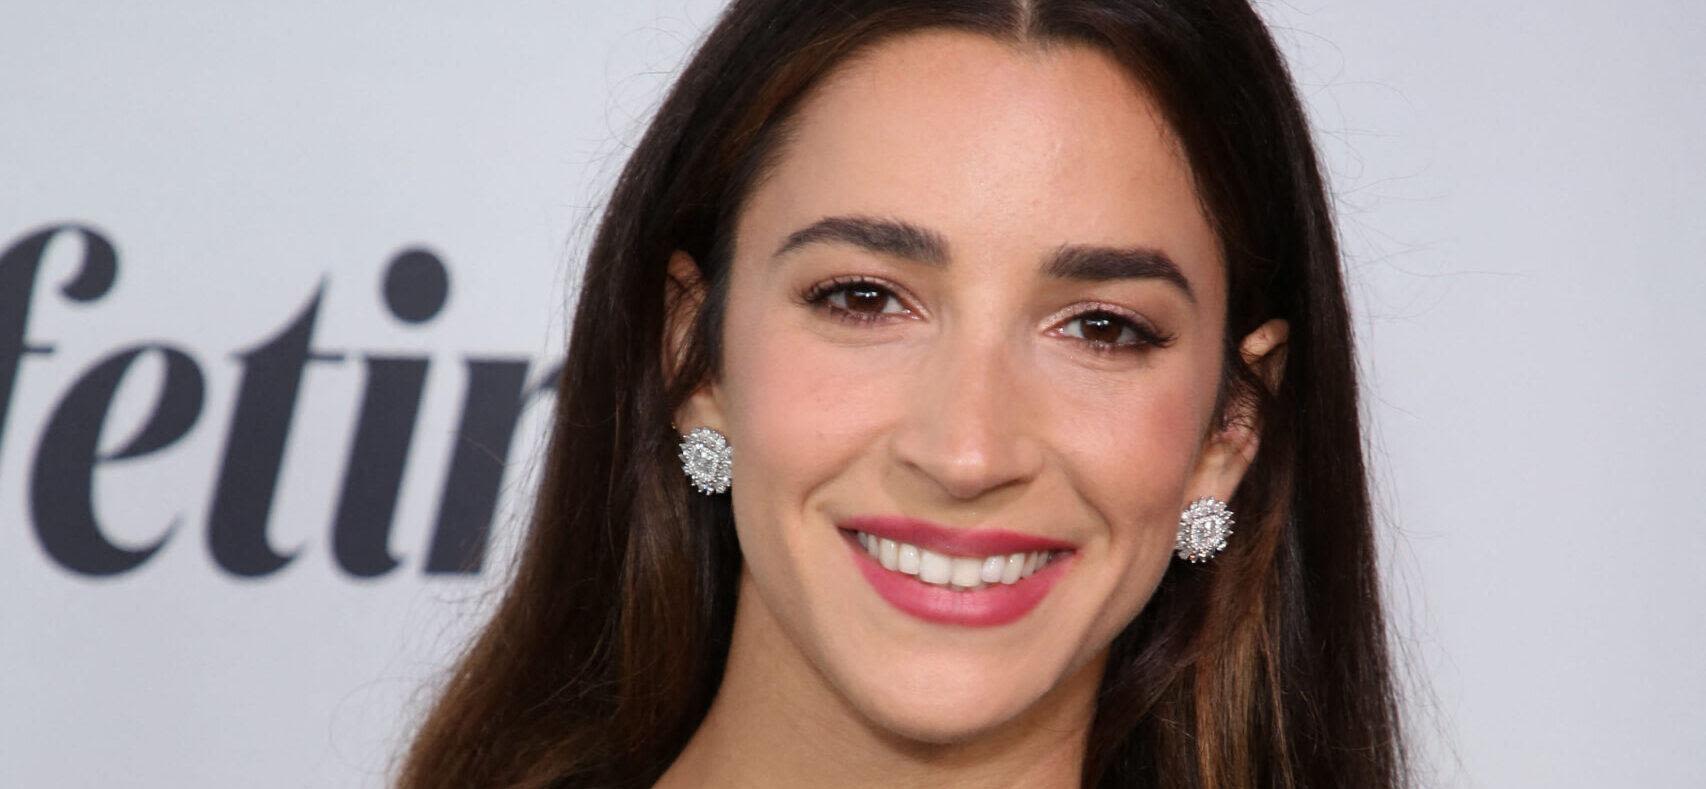 Aly Raisman's Children's Book To 'Empower' The Younger Generation